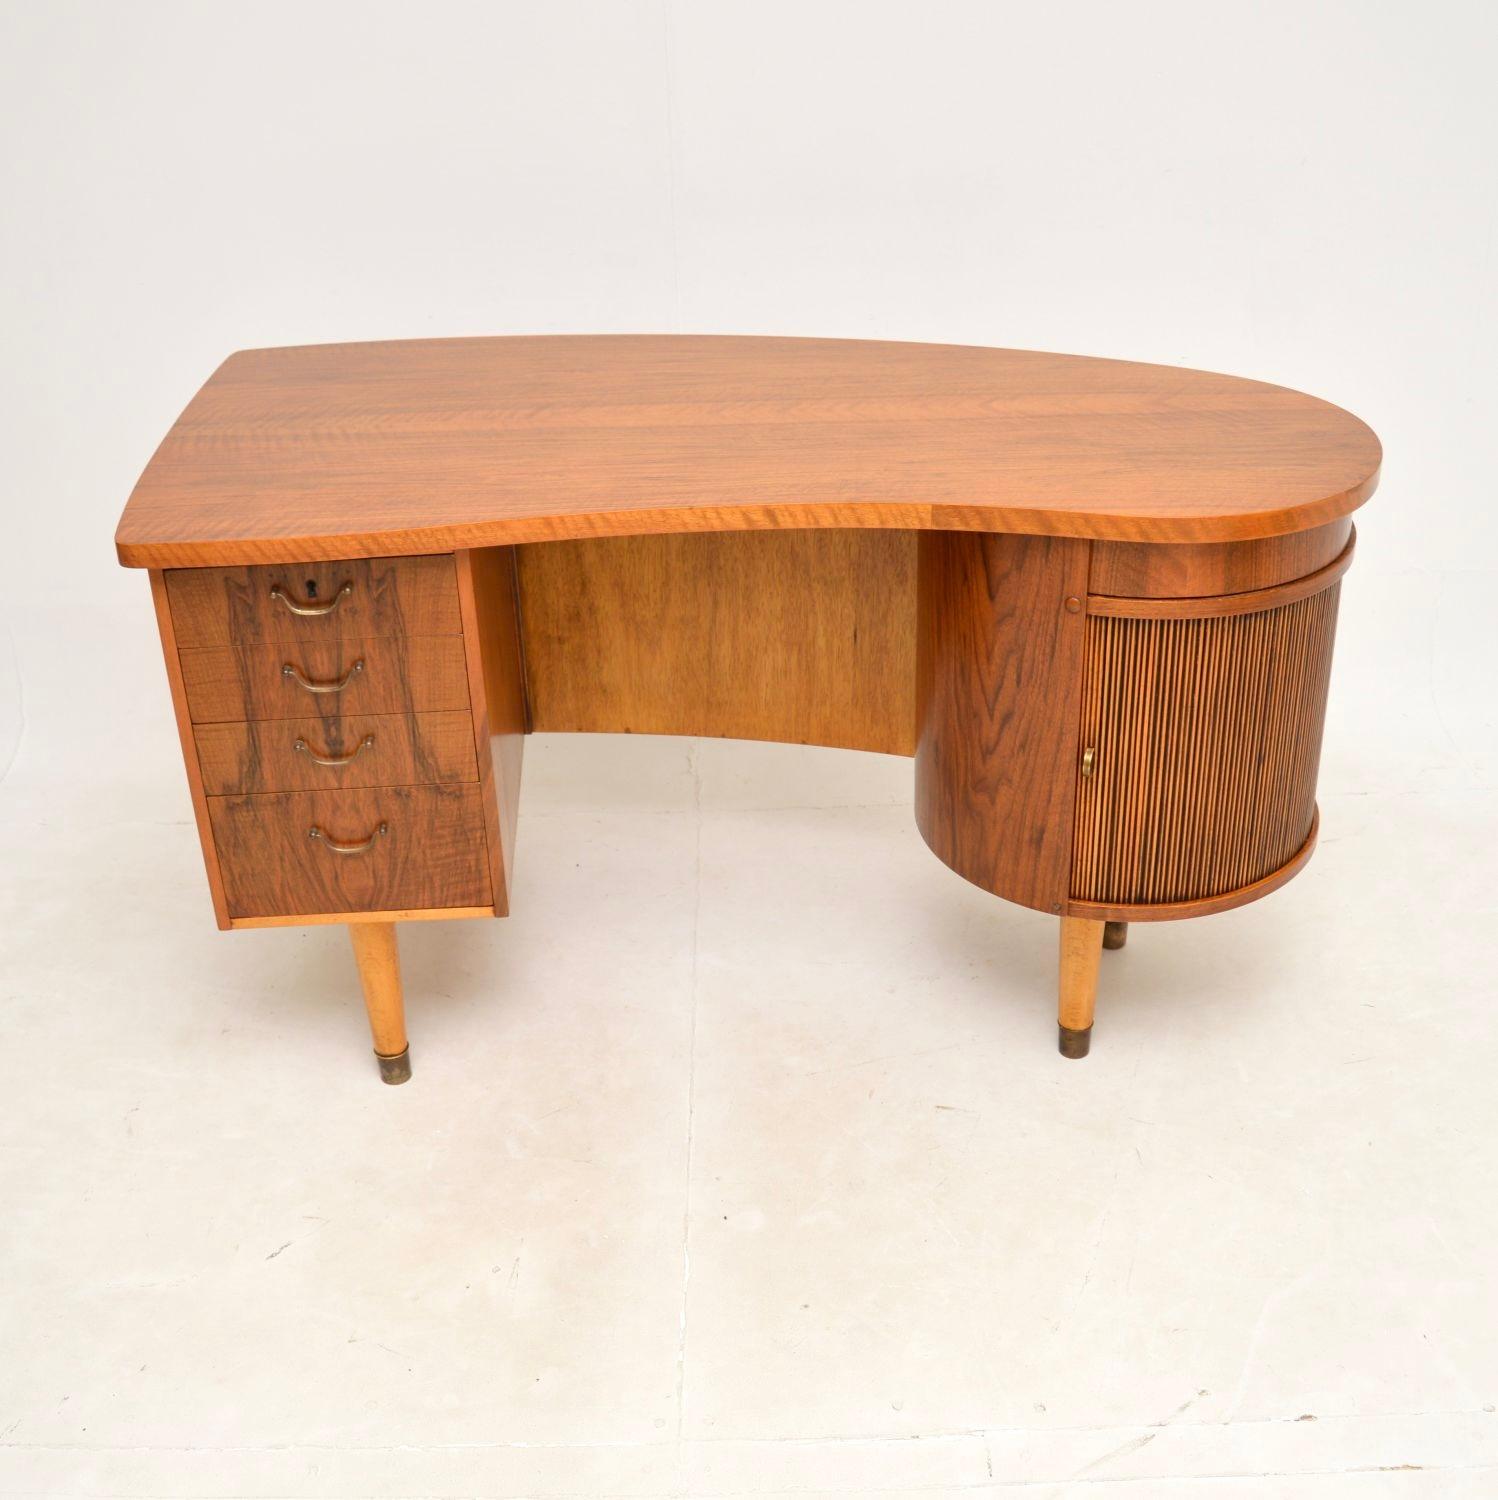 An absolutely spectacular Danish vintage walnut desk by Kai Kristiansen. This is the model 54 desk, it was made in Denmark in the 1950’s.

It is of amazing quality and has an incredible design. The top has an asymmetrical shape, on one side of the